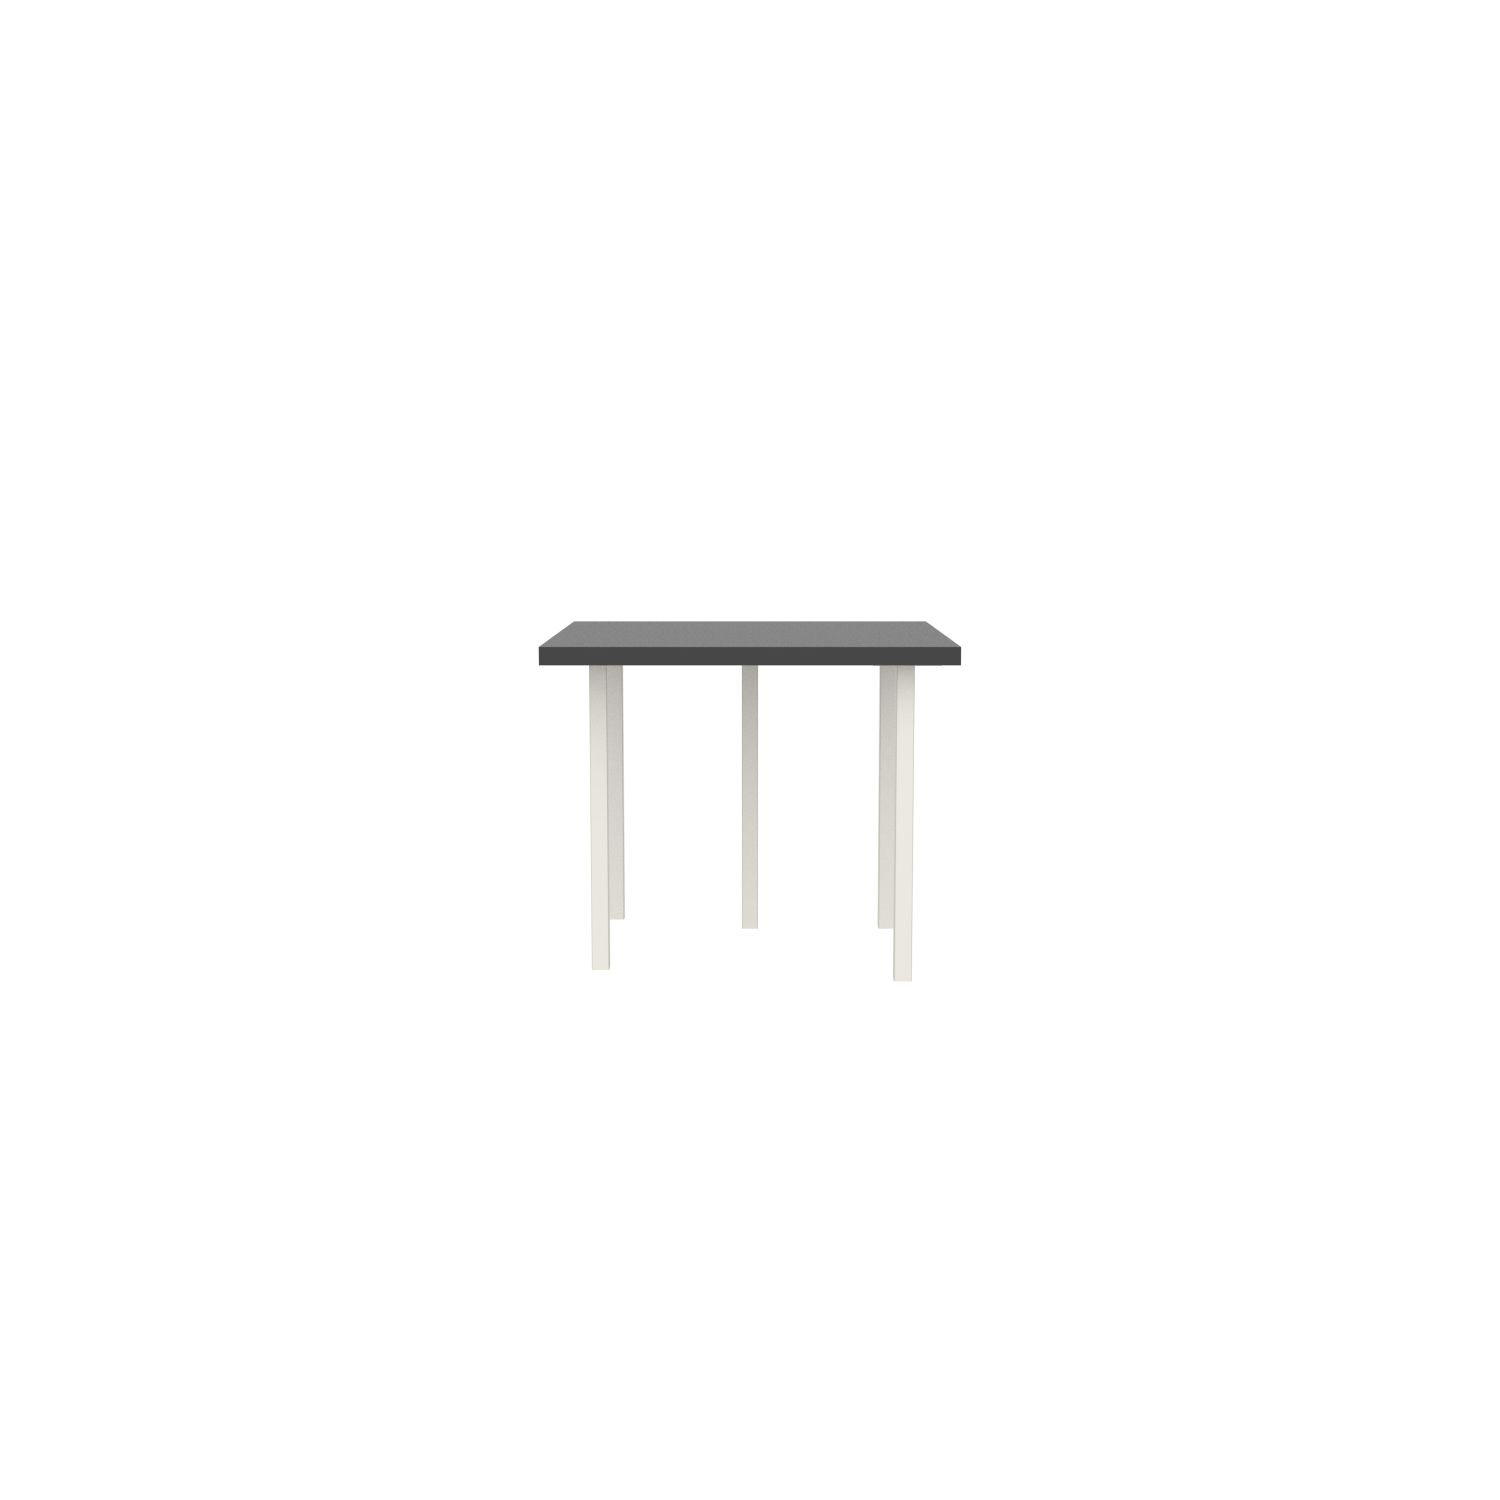 lensvelt bbrand table five fixed heigt 915x915 hpl black 50 mm price level 1 white ral9010